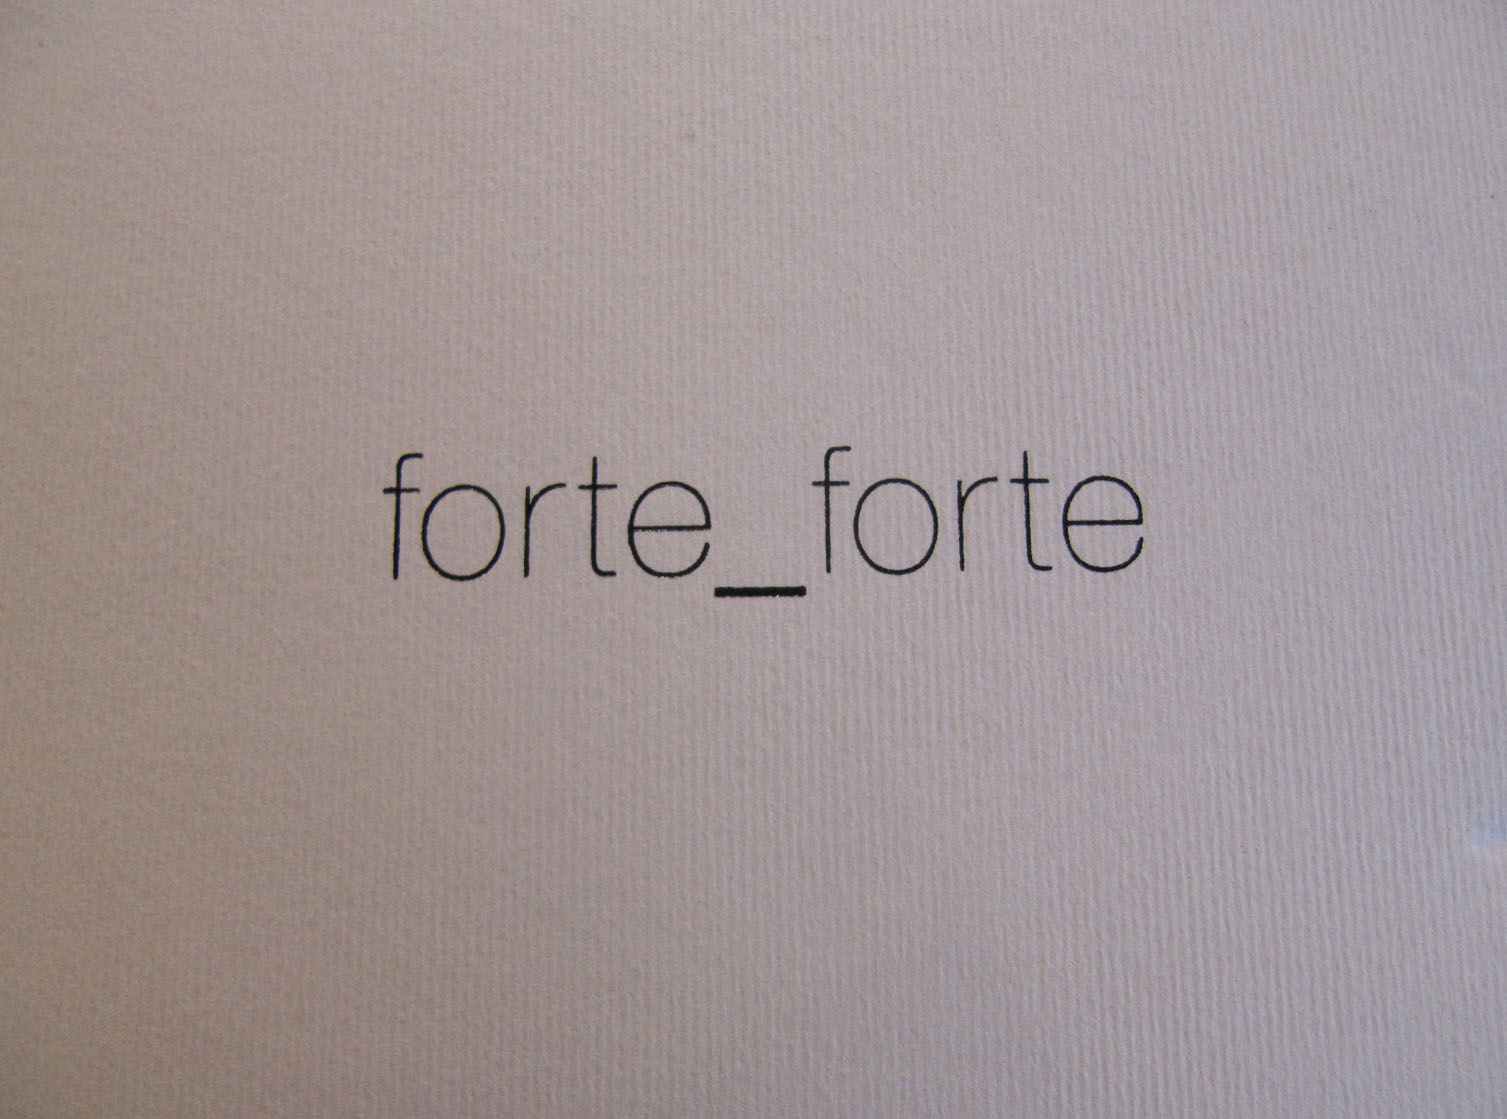 misch blog - new arrivals - sales - events - holiday hours: FORTE.FORTE ...